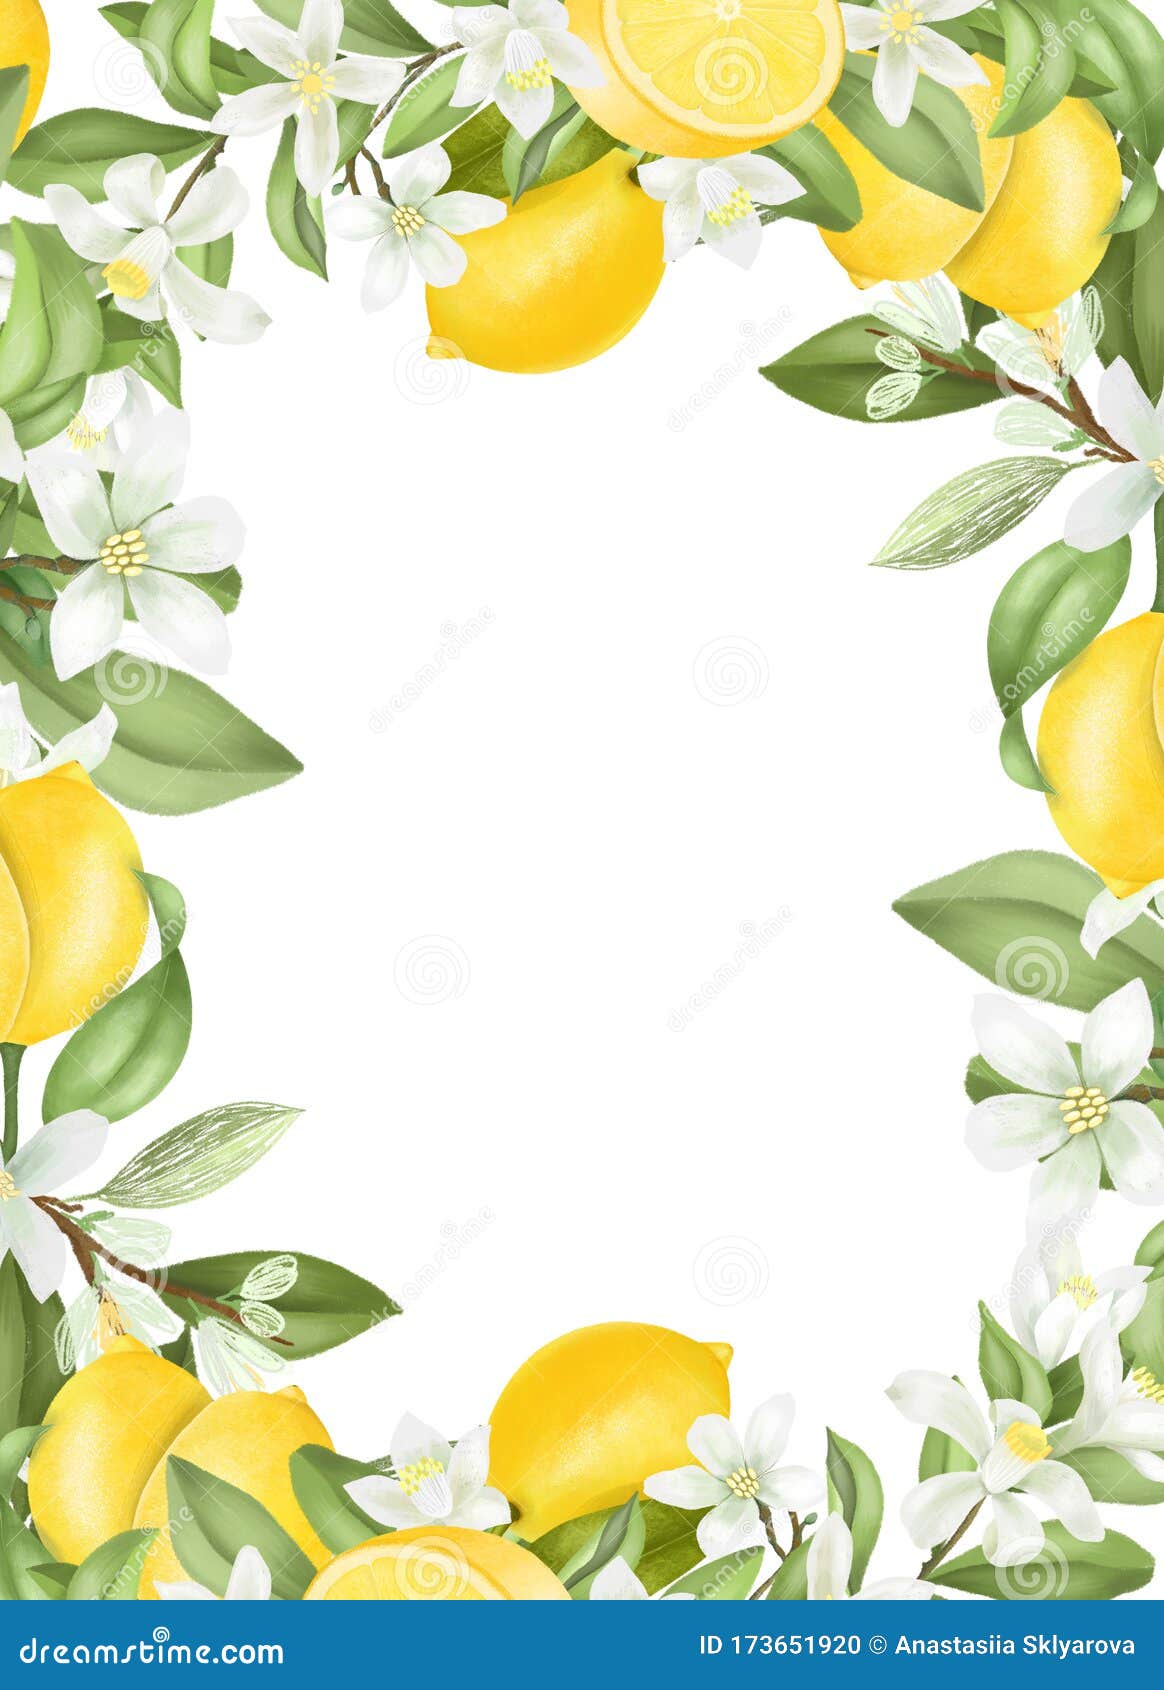 Card Template Frame Of Hand Drawn Blooming Lemon Tree Branches Stock Illustration Illustration Of Fruit Blossom 173651920